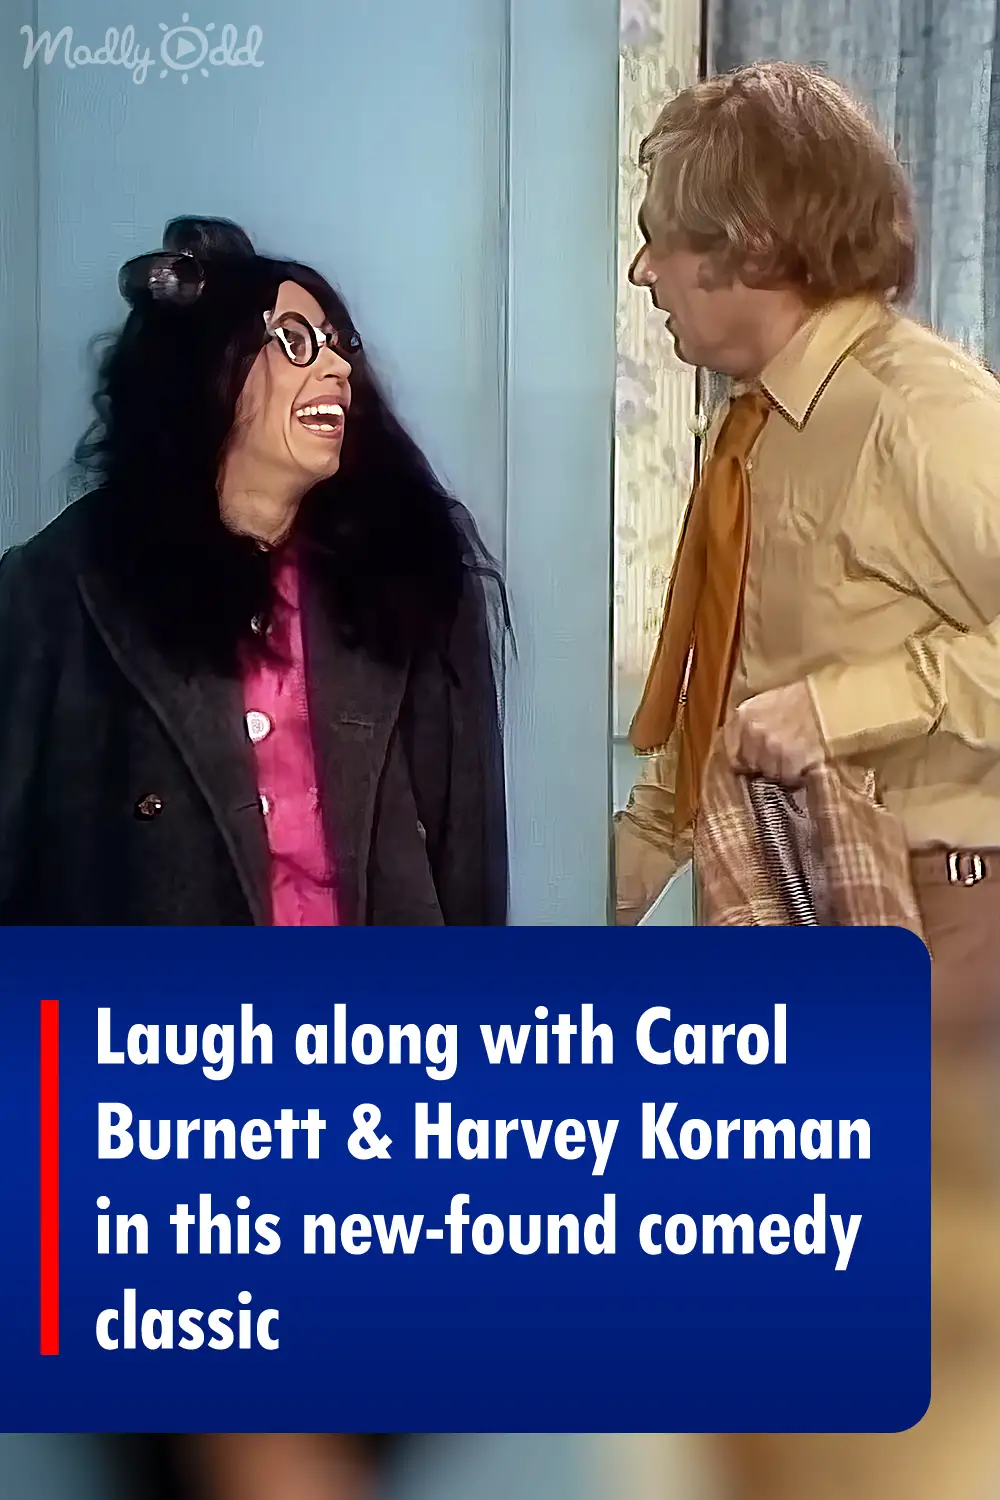 Laugh along with Carol Burnett & Harvey Korman in this new-found comedy classic